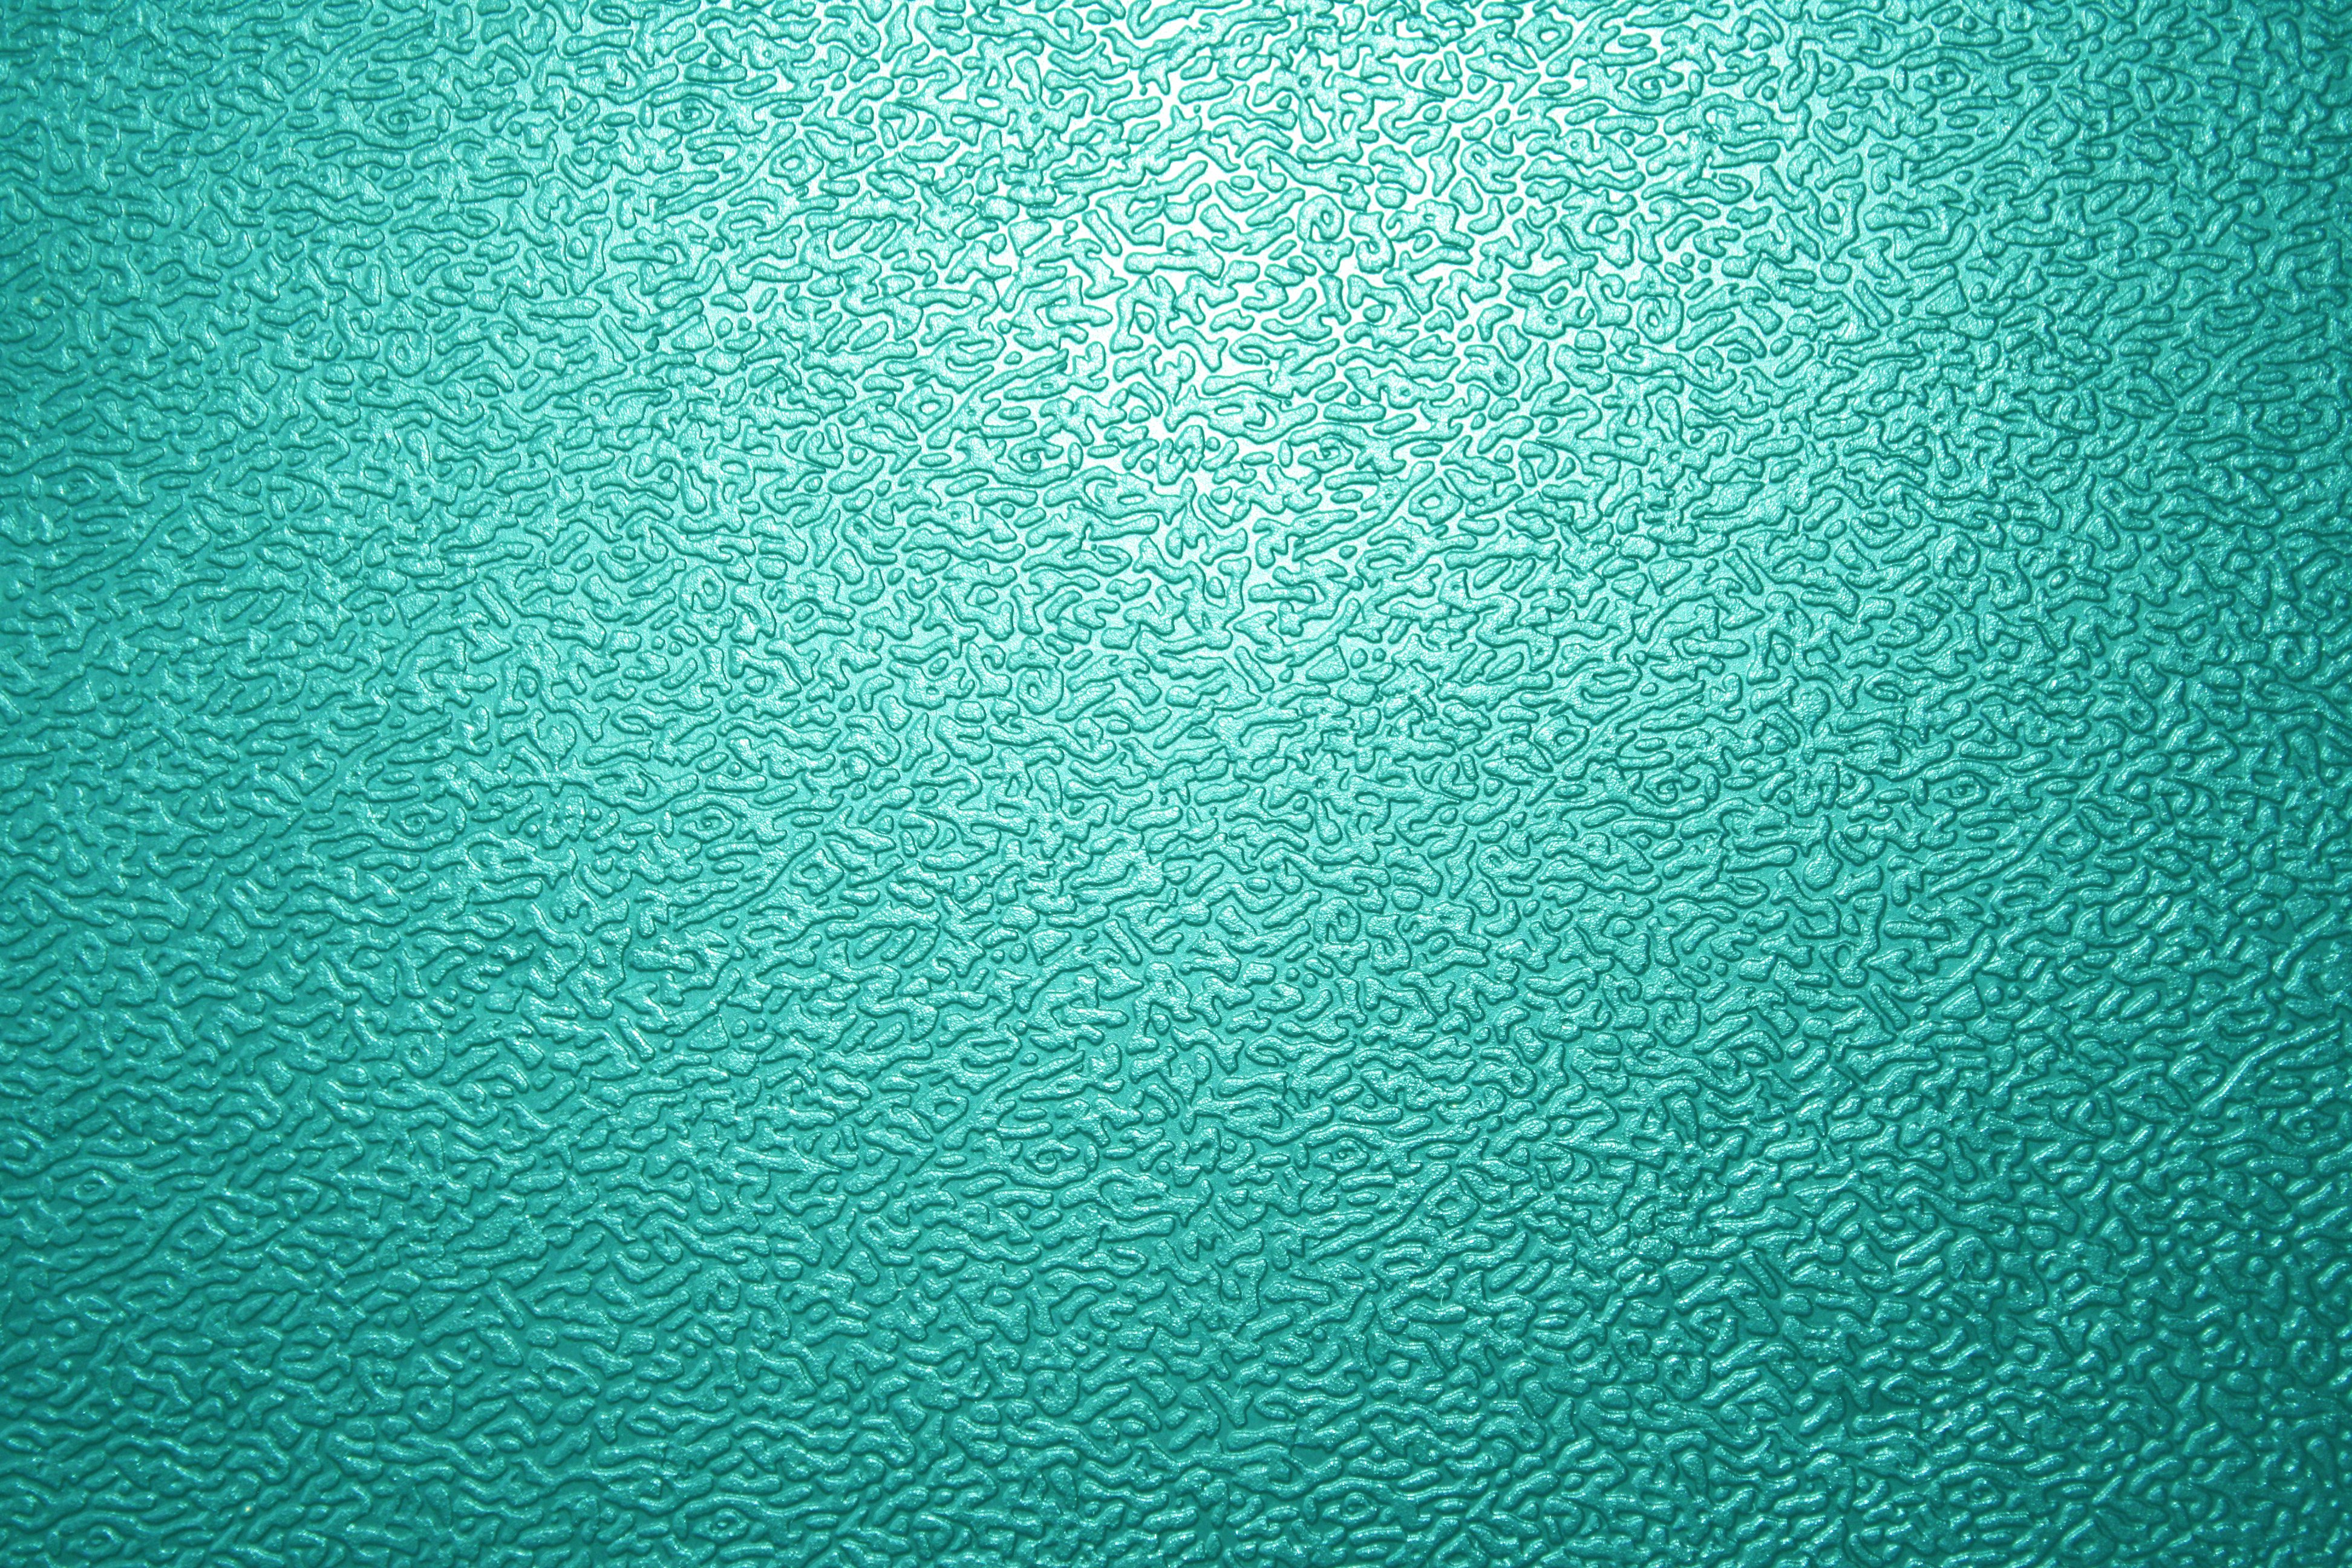 Textured Teal Plastic Close Up Picture Photograph Photos